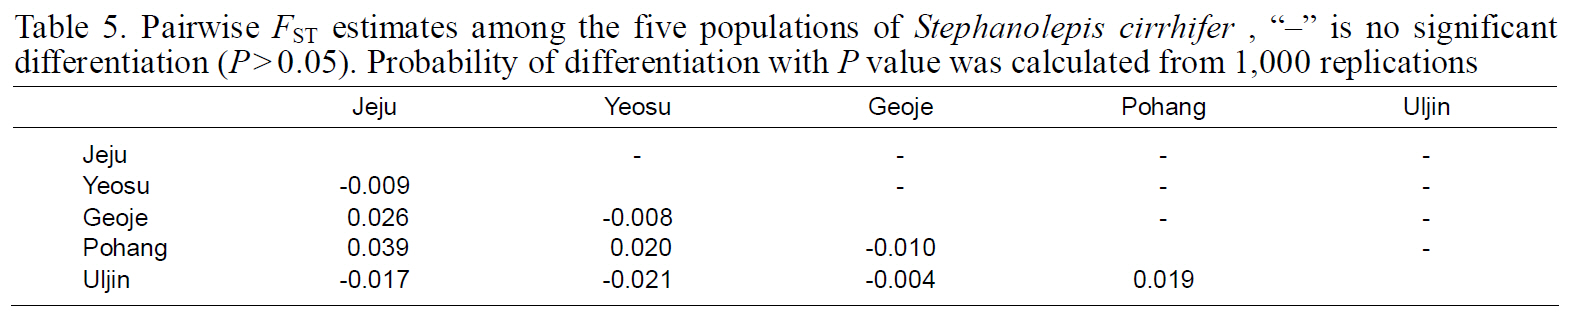 Pairwise FST estimates among the five populations of  Stephanolepis cirrhifer  “?” is no significant differentiation (P>0.05). Probability of differentiation with P value was calculated from 1000 replications